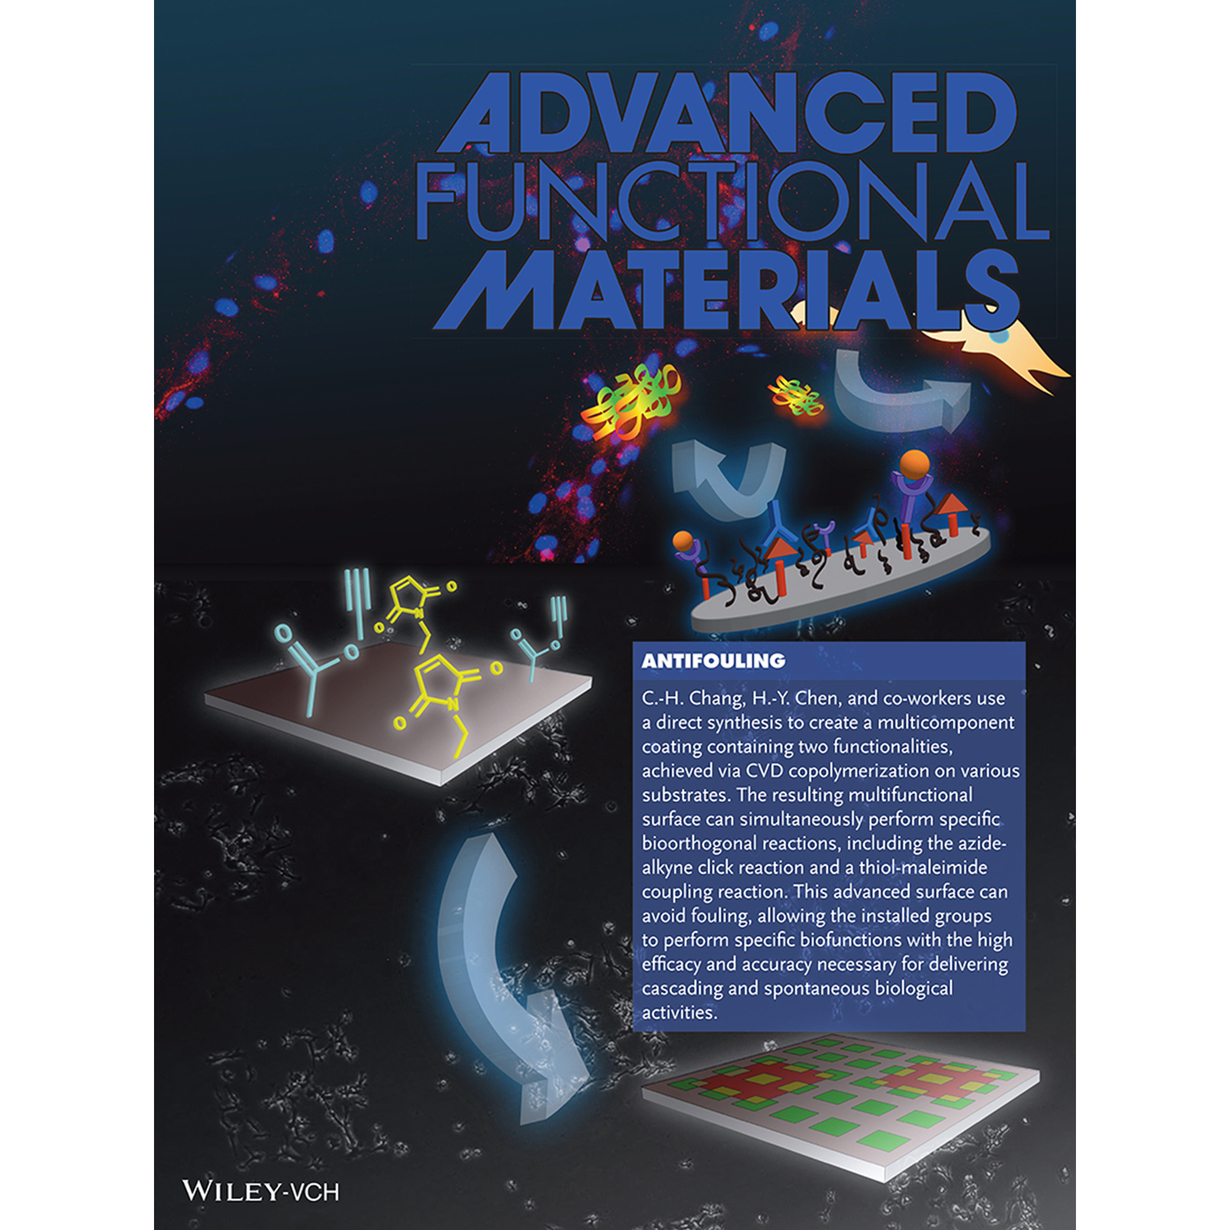  Vapor-Based Multicomponent Coatings for Antifouling and Biofunctional Synergic Modifications